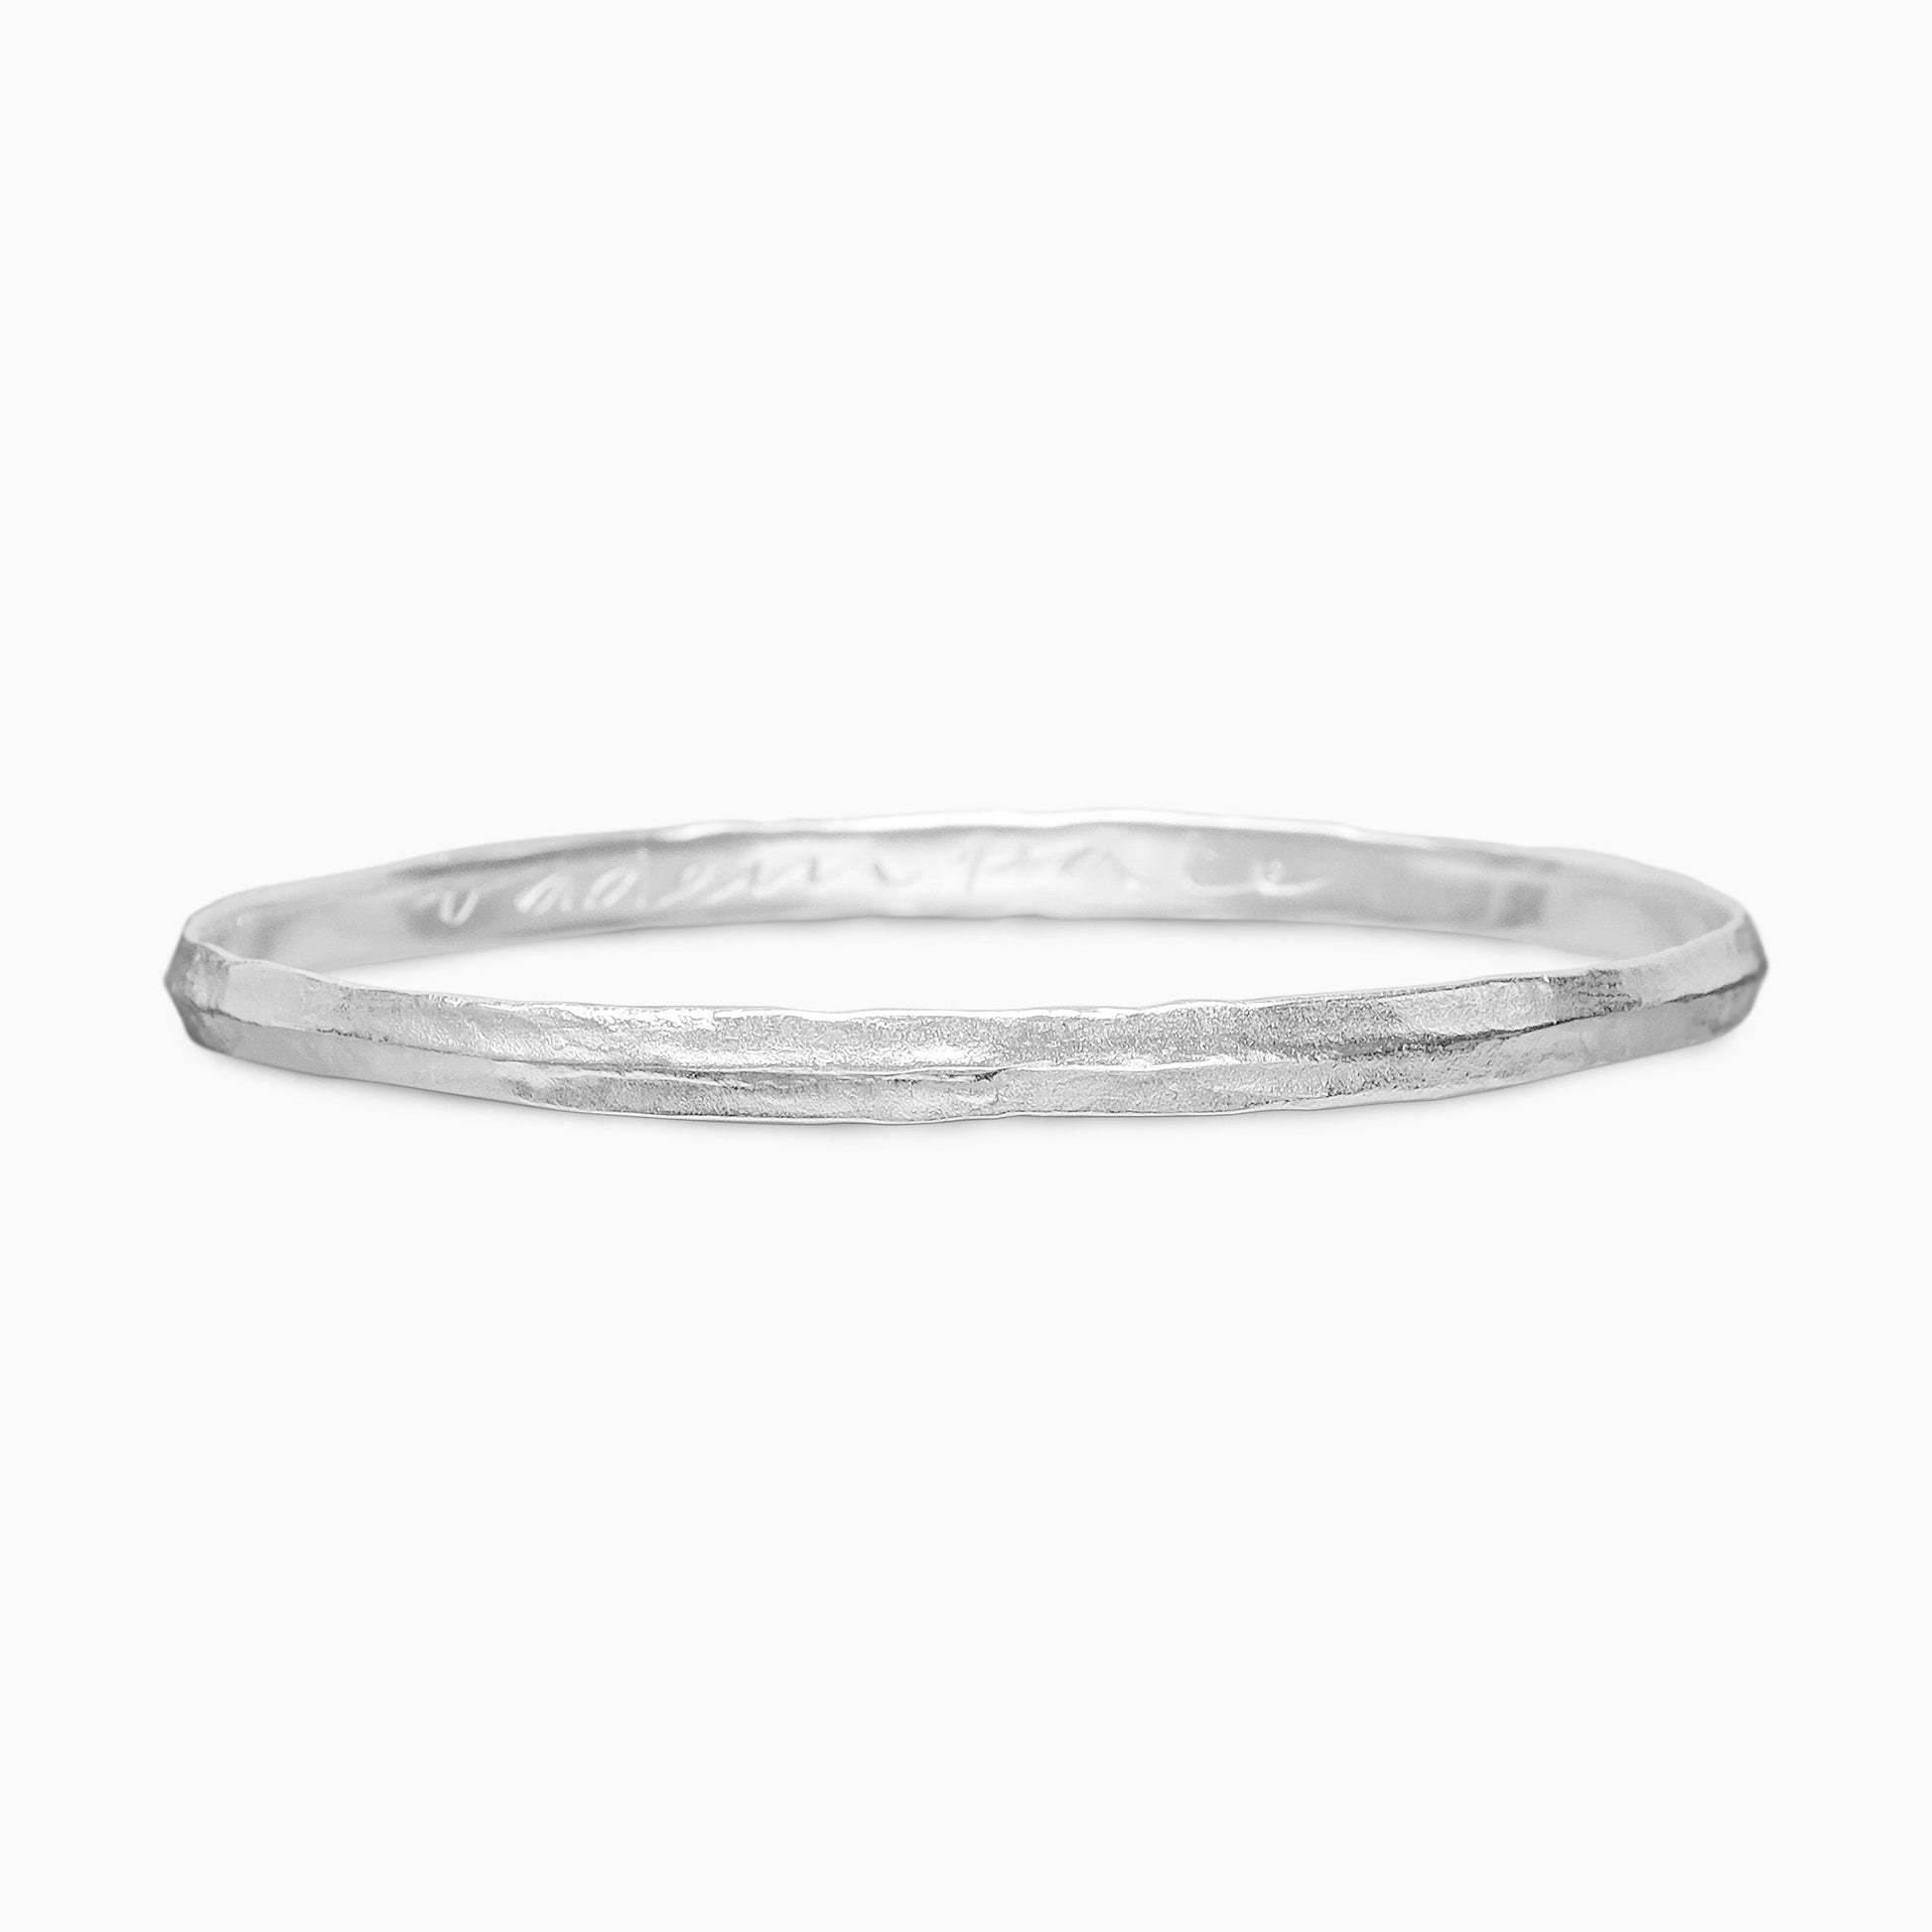 A recycled Silver bangle rising to a central ridge, engraved inside ‘VAde in Pace’ which is ‘Go in Peace’ in Latin. Width 5mm. Inside diameter 63mm.